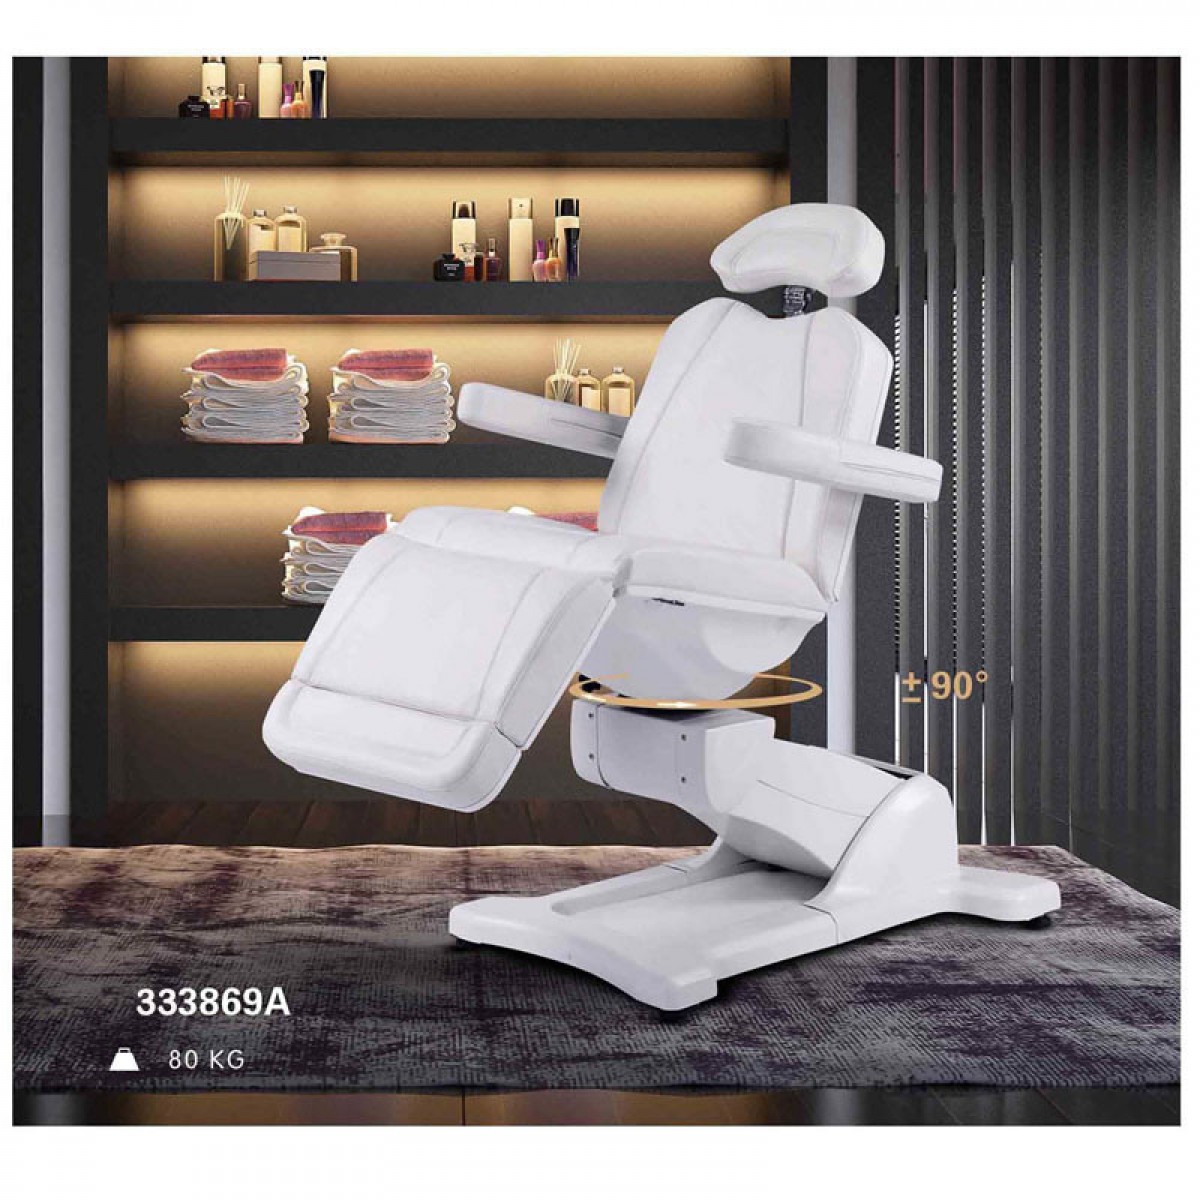 CE approval cosmetic treatment bed PU/PVC leather beauty parlor chair